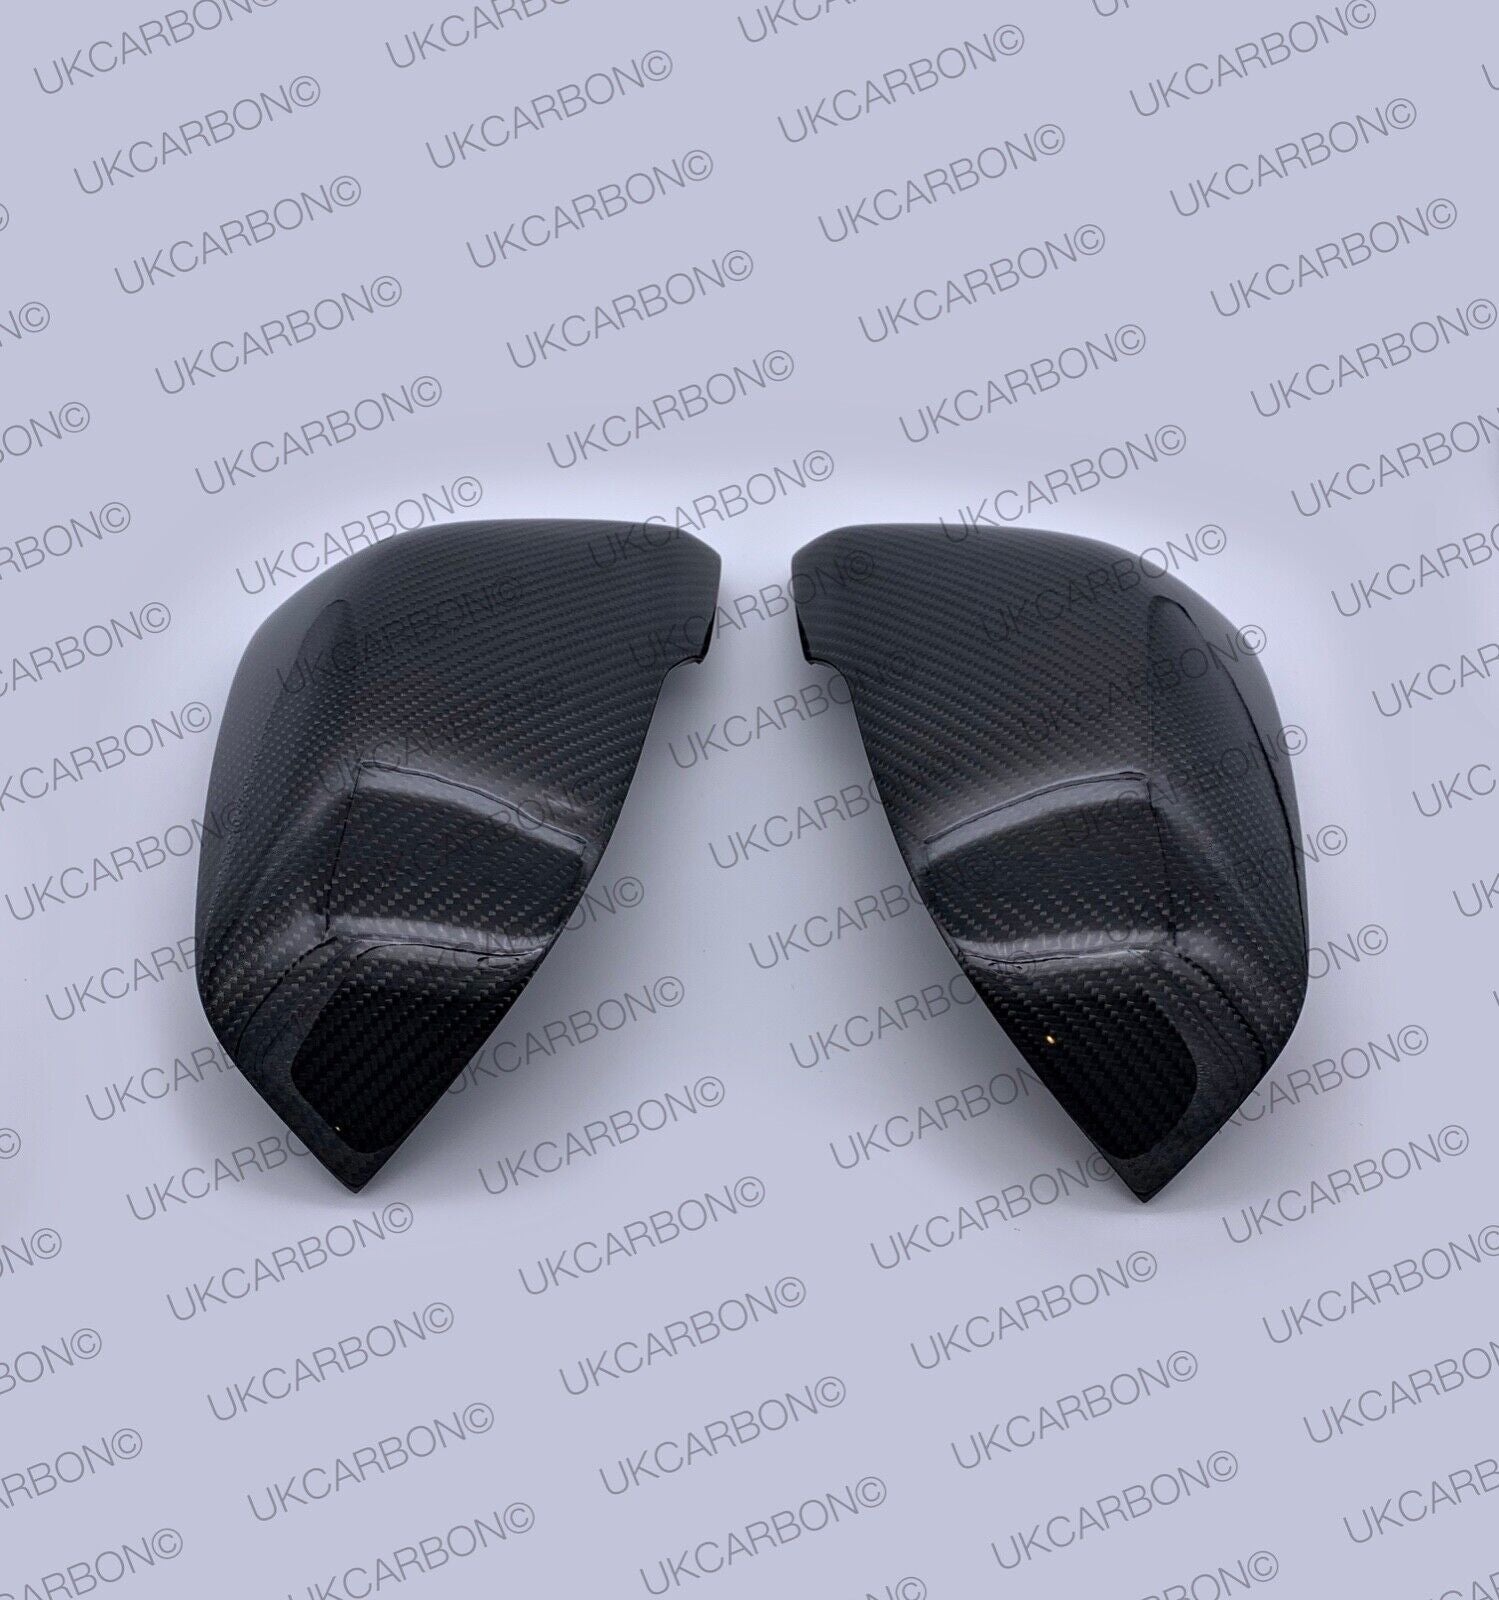 BMW M135i Carbon Mirror Wing Cover Replacements M Performance F40 by UKCarbon - UKCarbon